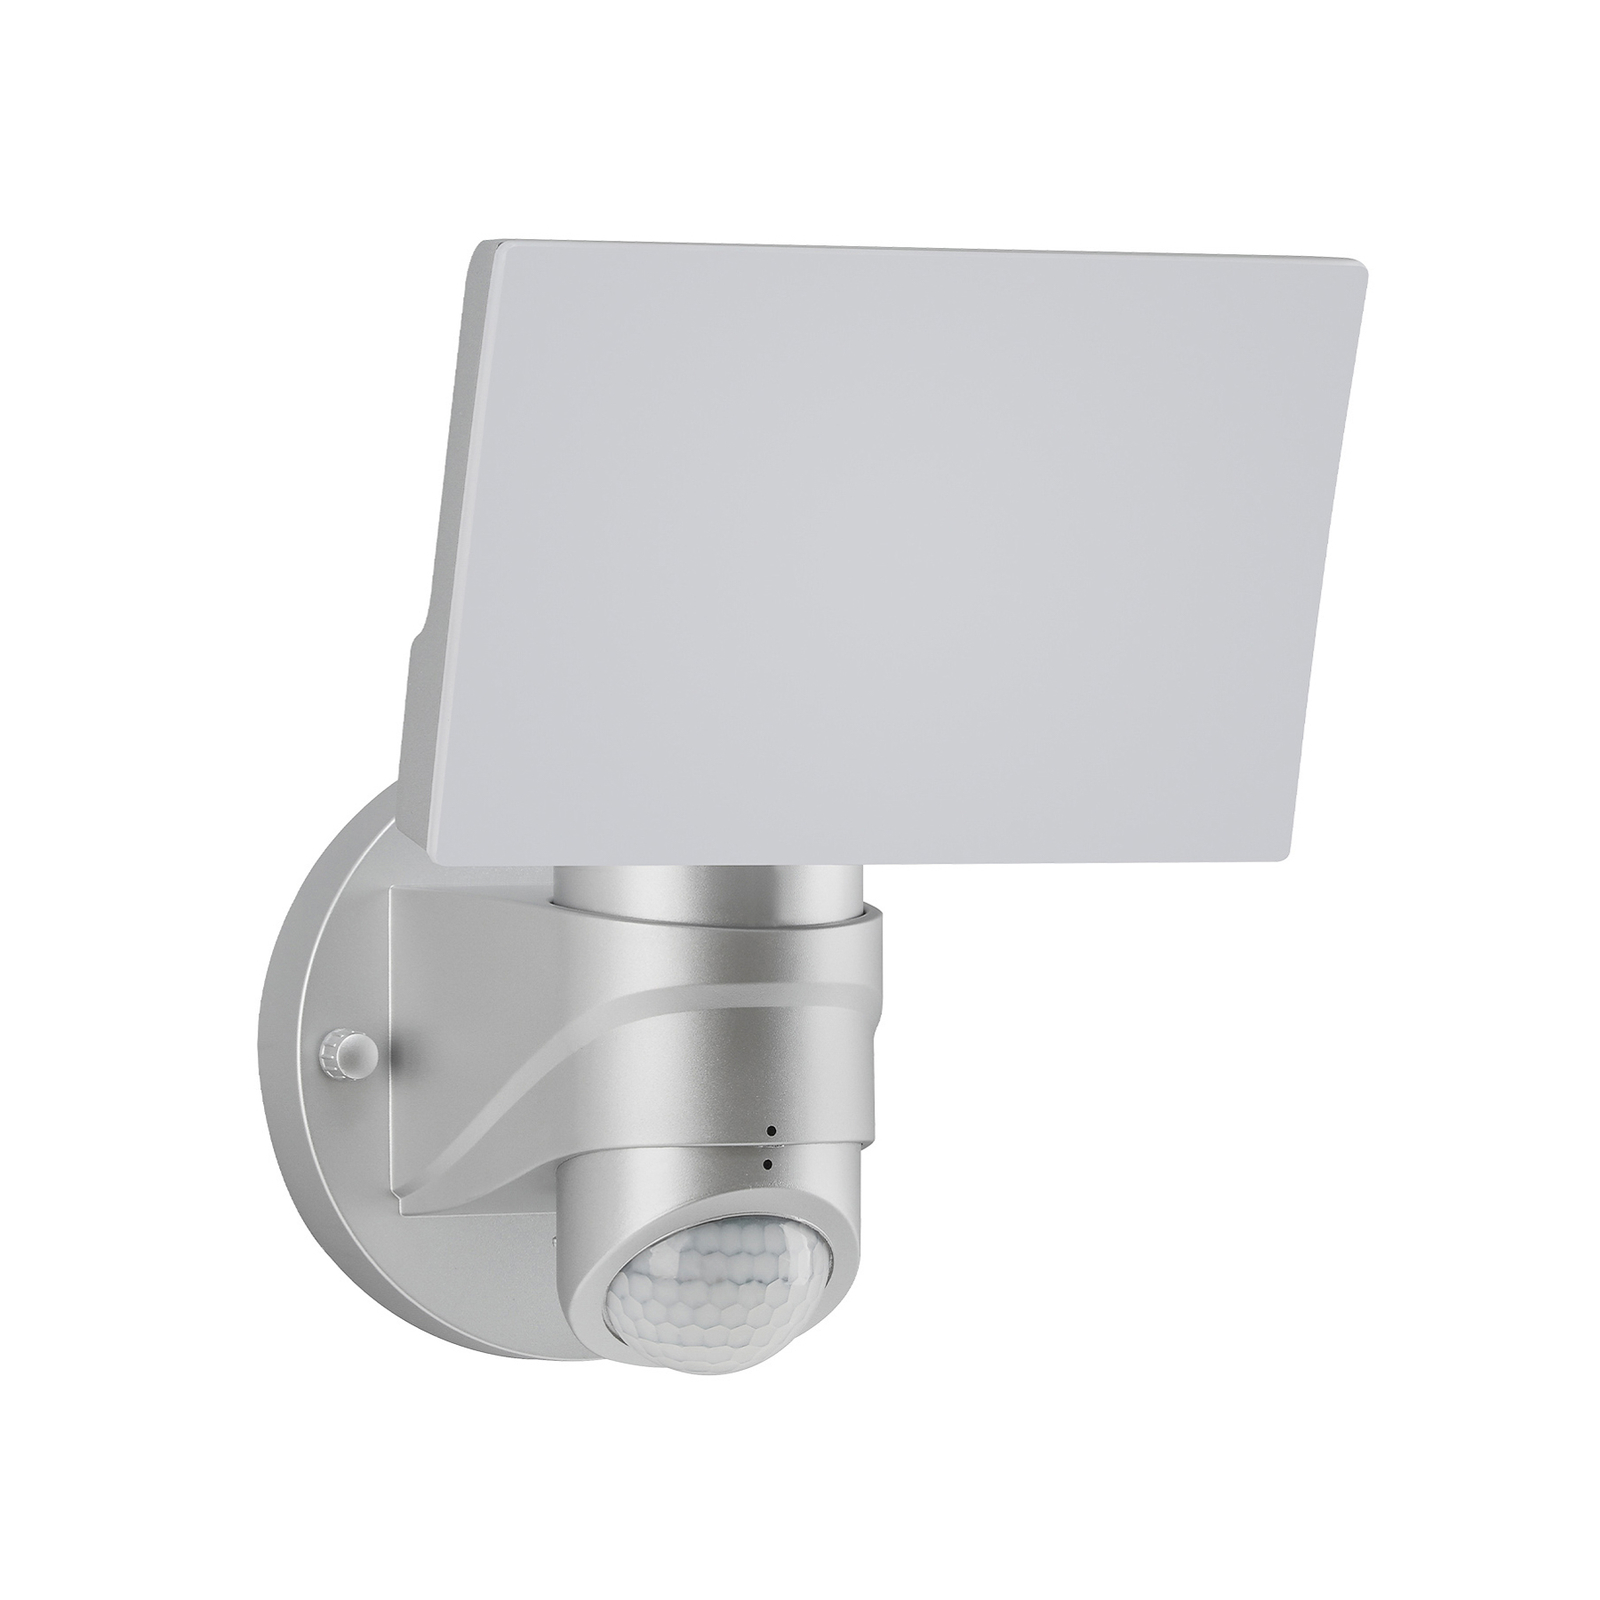 Cristo LED outdoor wall light with sensor, silver